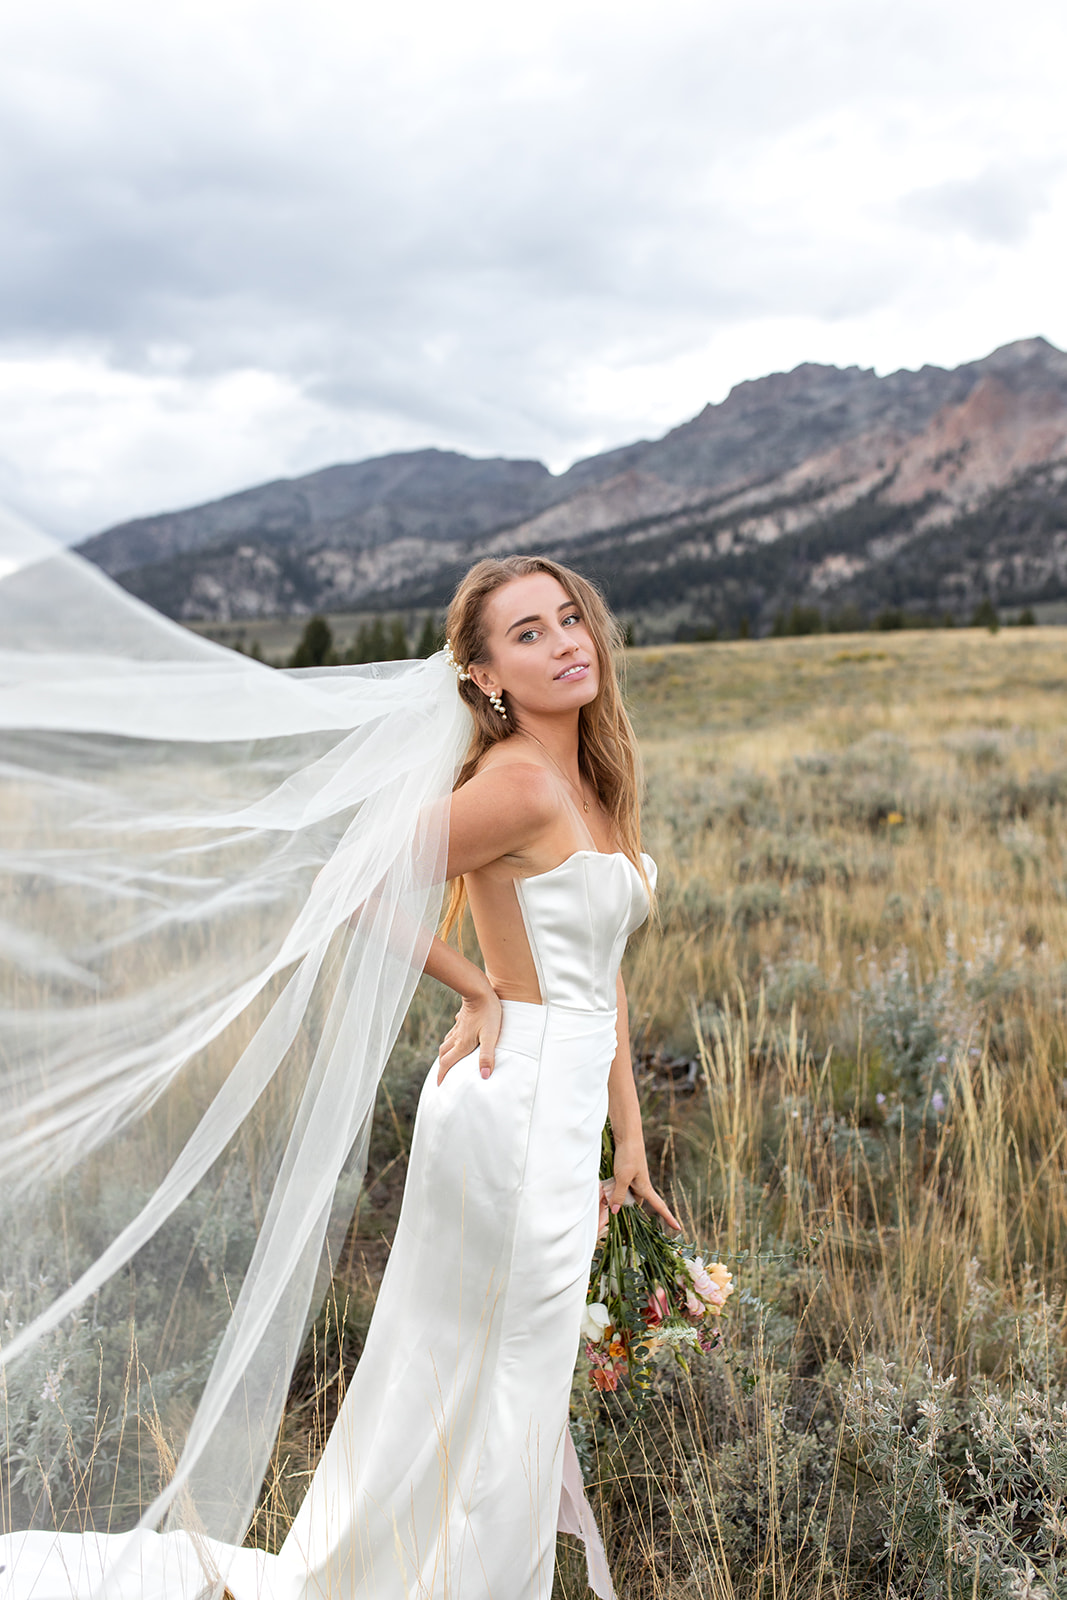 A stunning wedding in Sun Valley, Idaho, the bride wearing an Ines Di Santos couture gown.